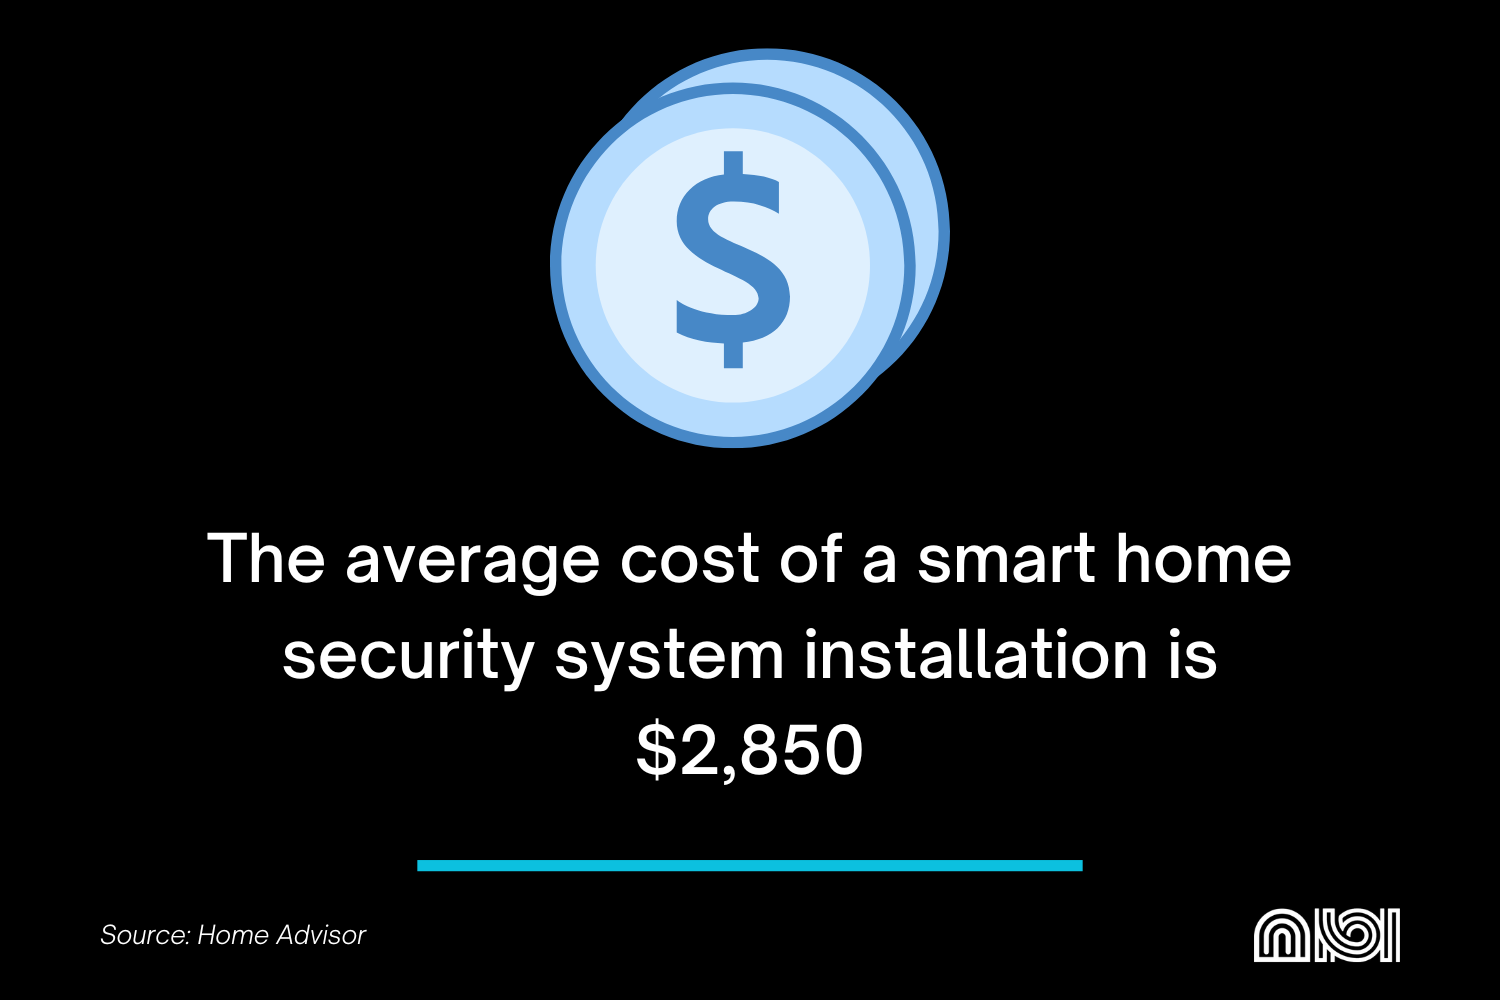 Average cost of smart home security system installation as $2,850